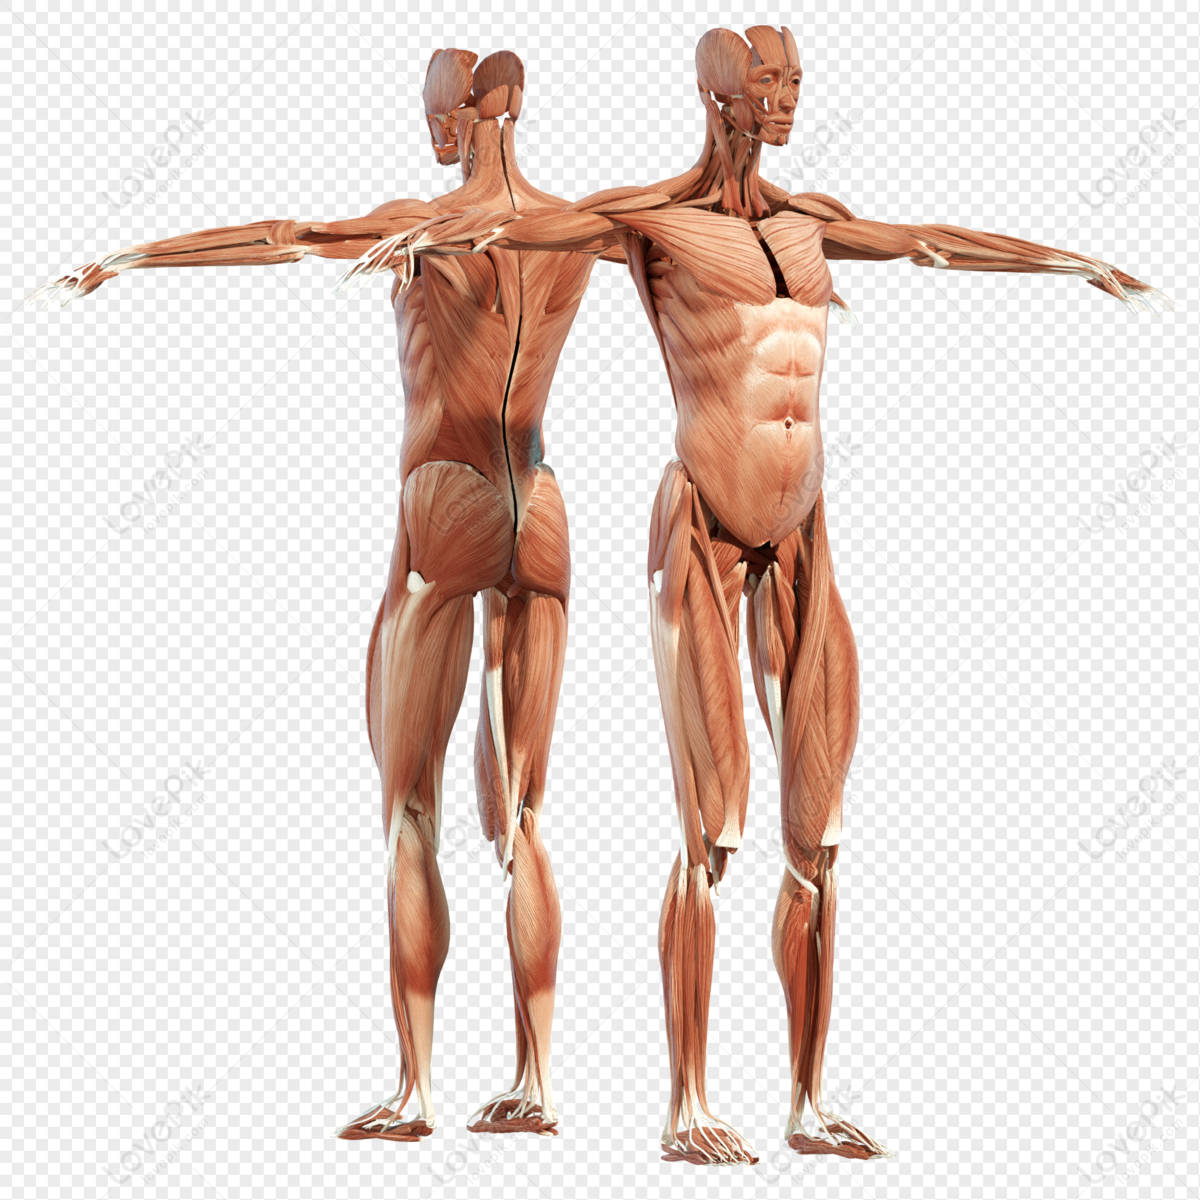 Healthy Body PNG Images With Transparent Background